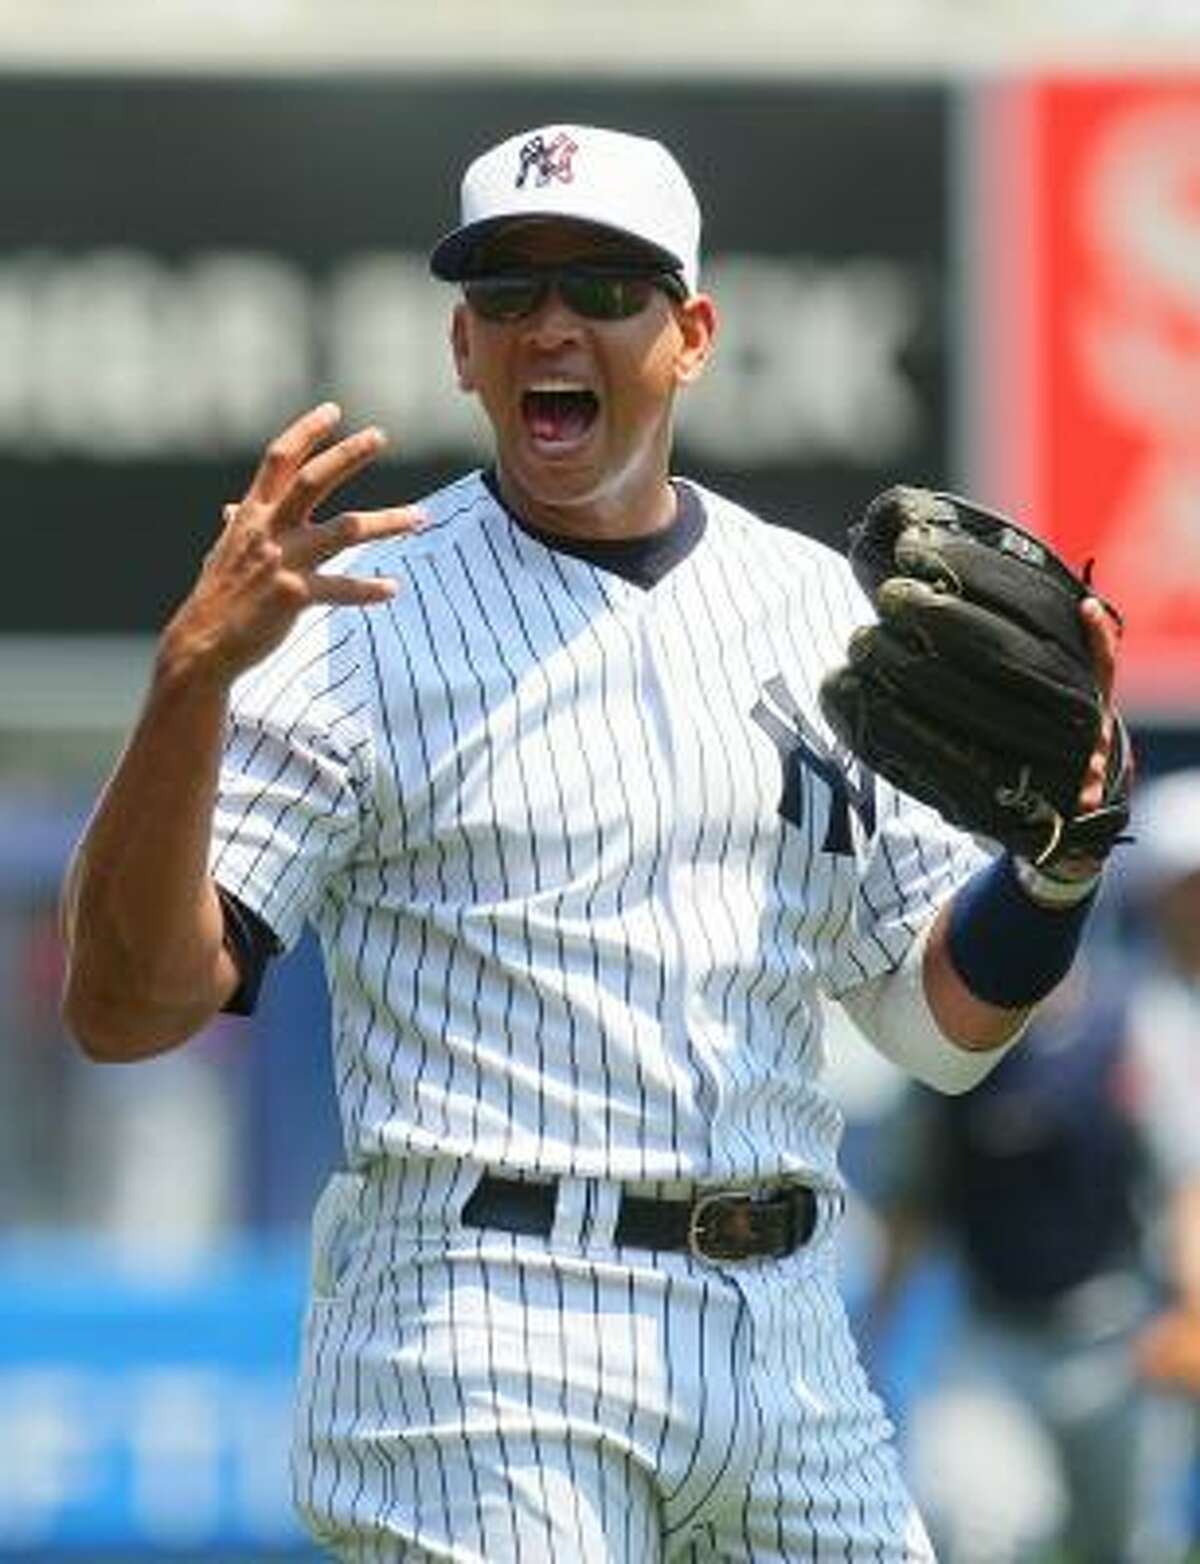 A-Rod was born in New York City, but moved with his family to the Dominican Republic when he was four, then to Miami.